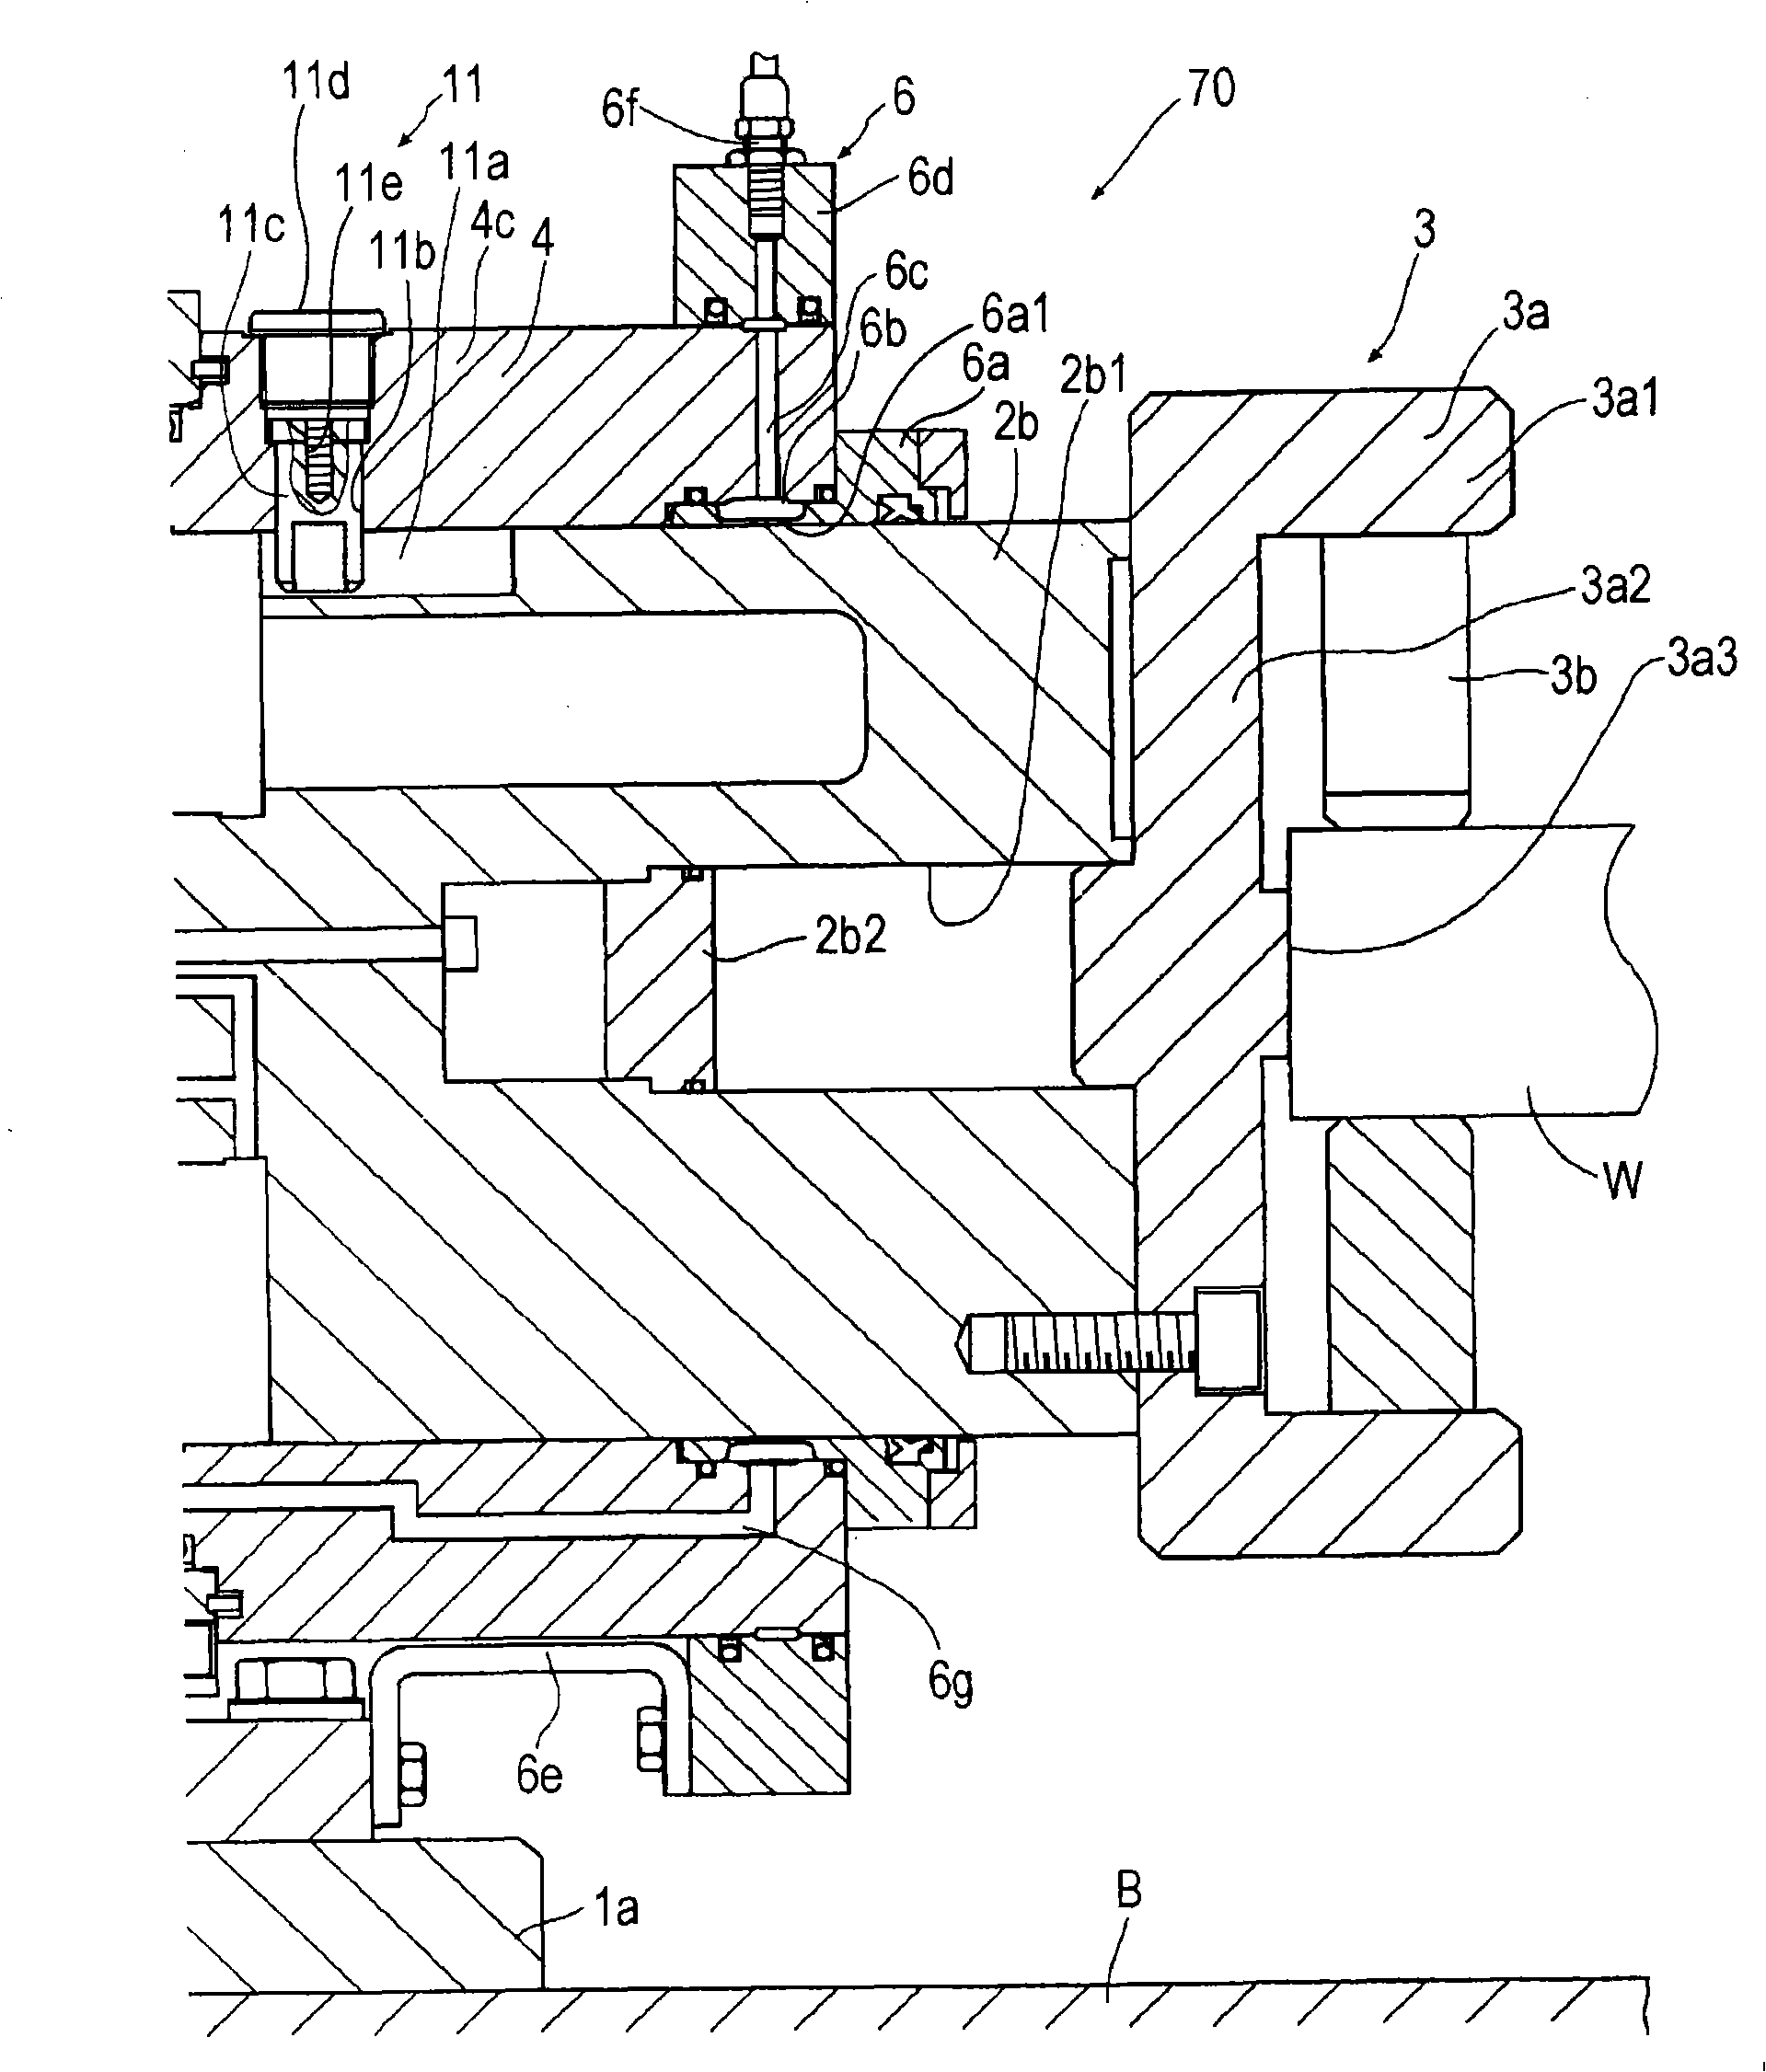 Workpiece support device and rotary indexer